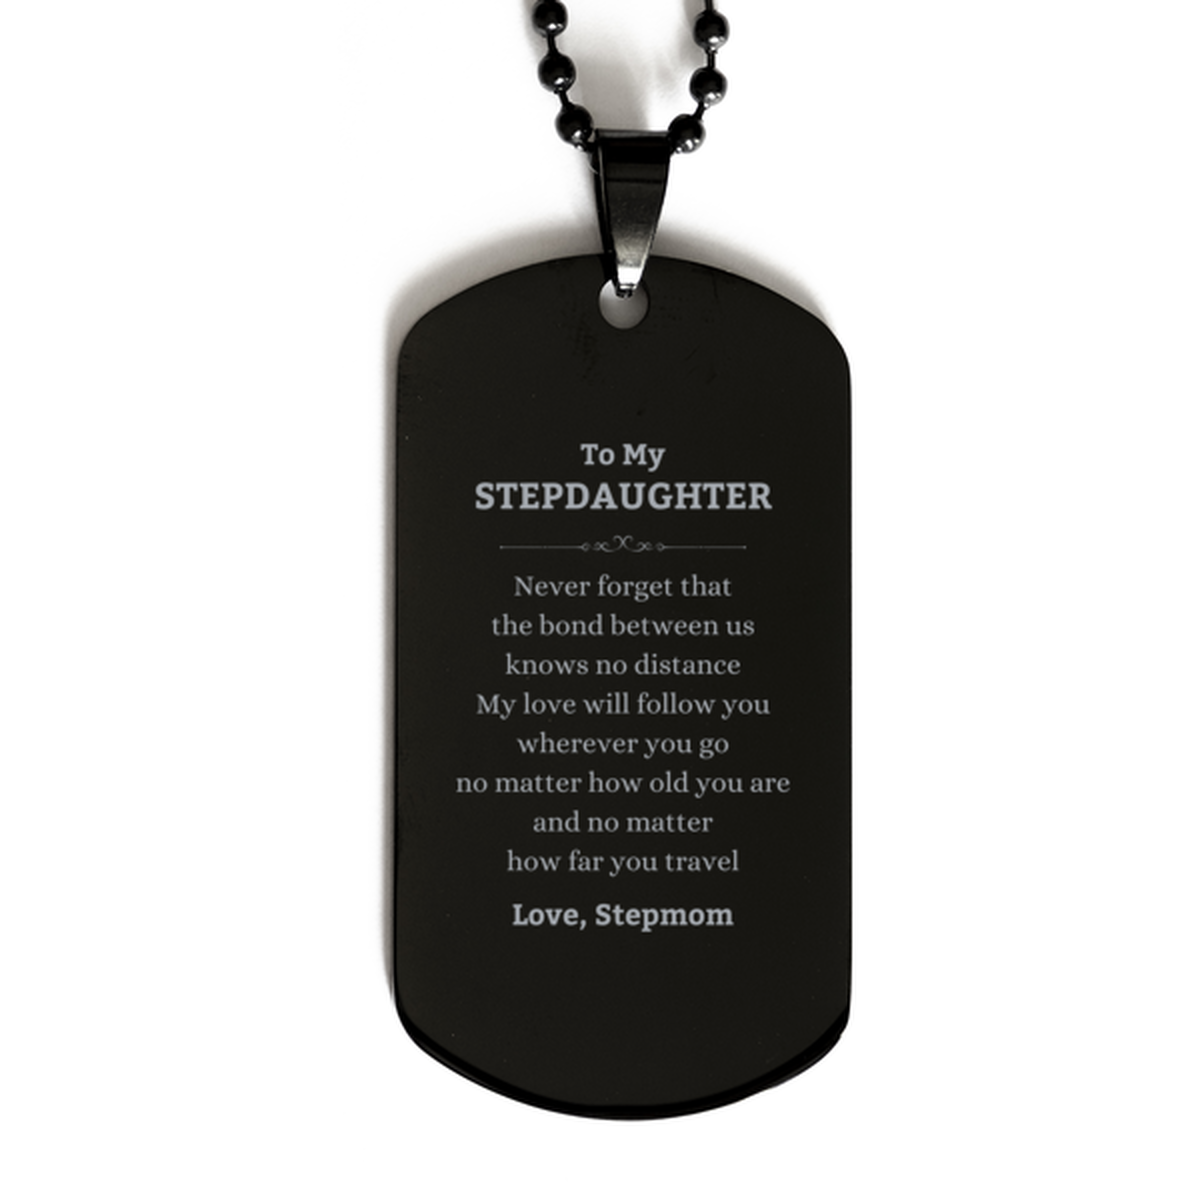 Stepdaughter Birthday Gifts from Stepmom, Adjustable Black Dog Tag for Stepdaughter Christmas Graduation Unique Gifts Stepdaughter Never forget that the bond between us knows no distance. Love, Stepmom